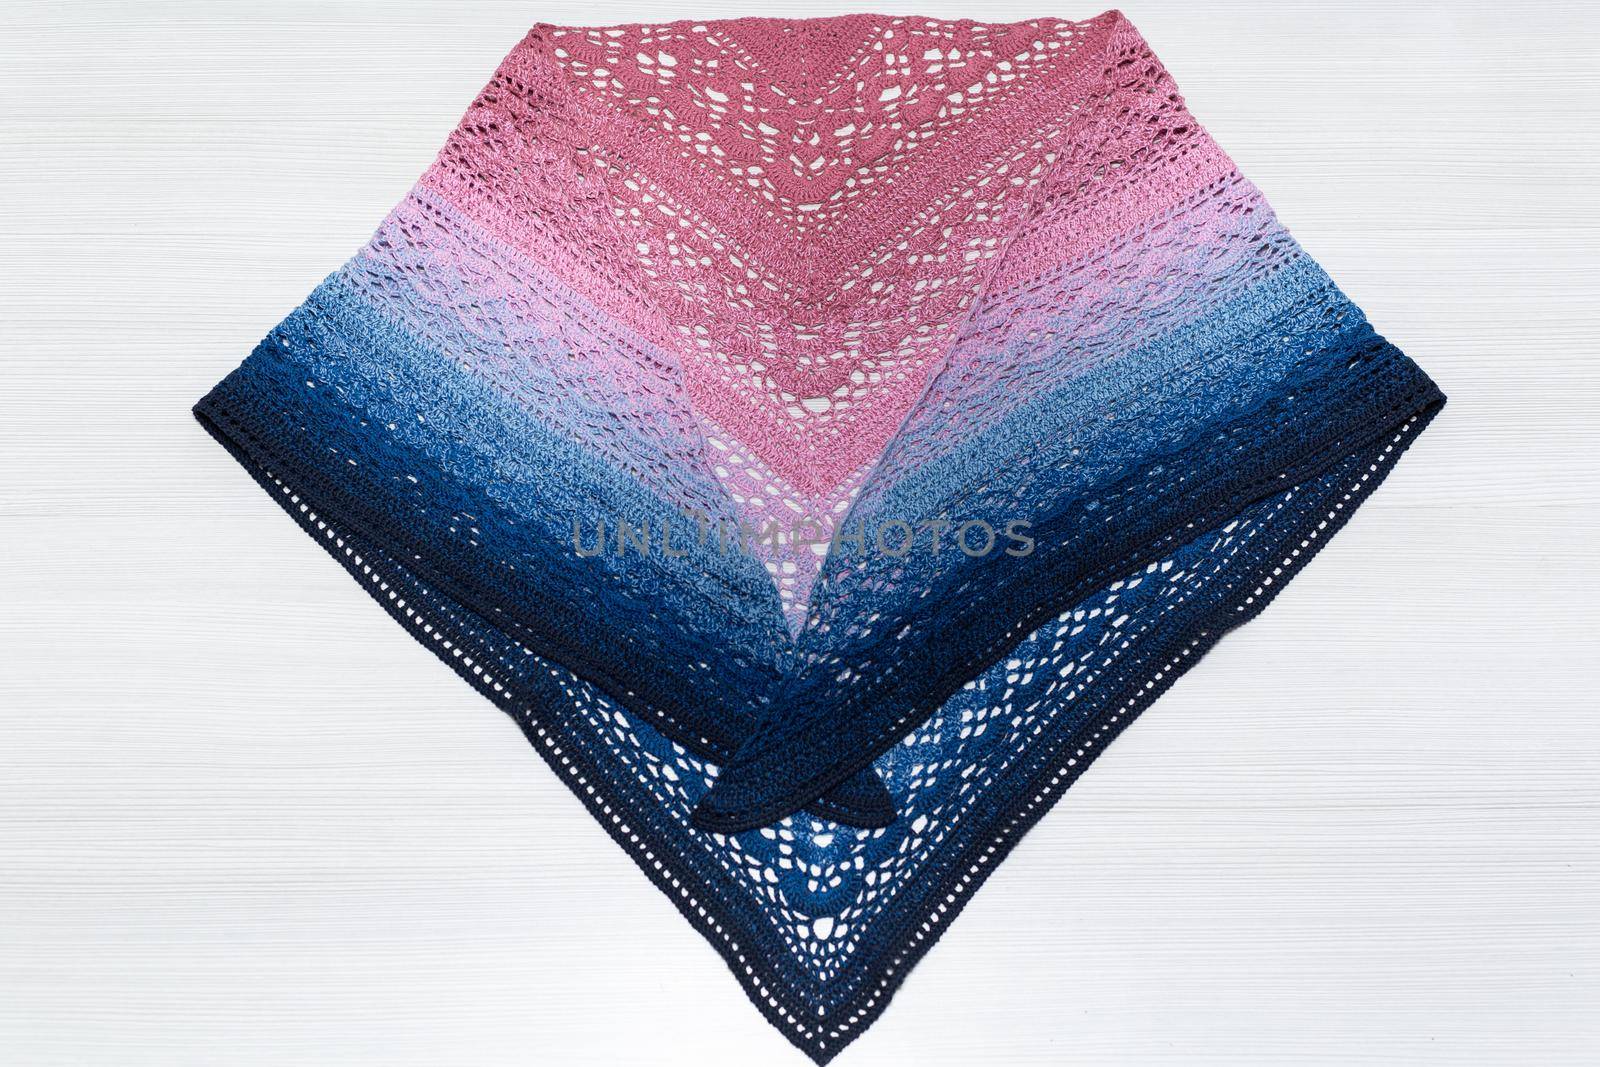 Knitted scarf pink and blue on a white background